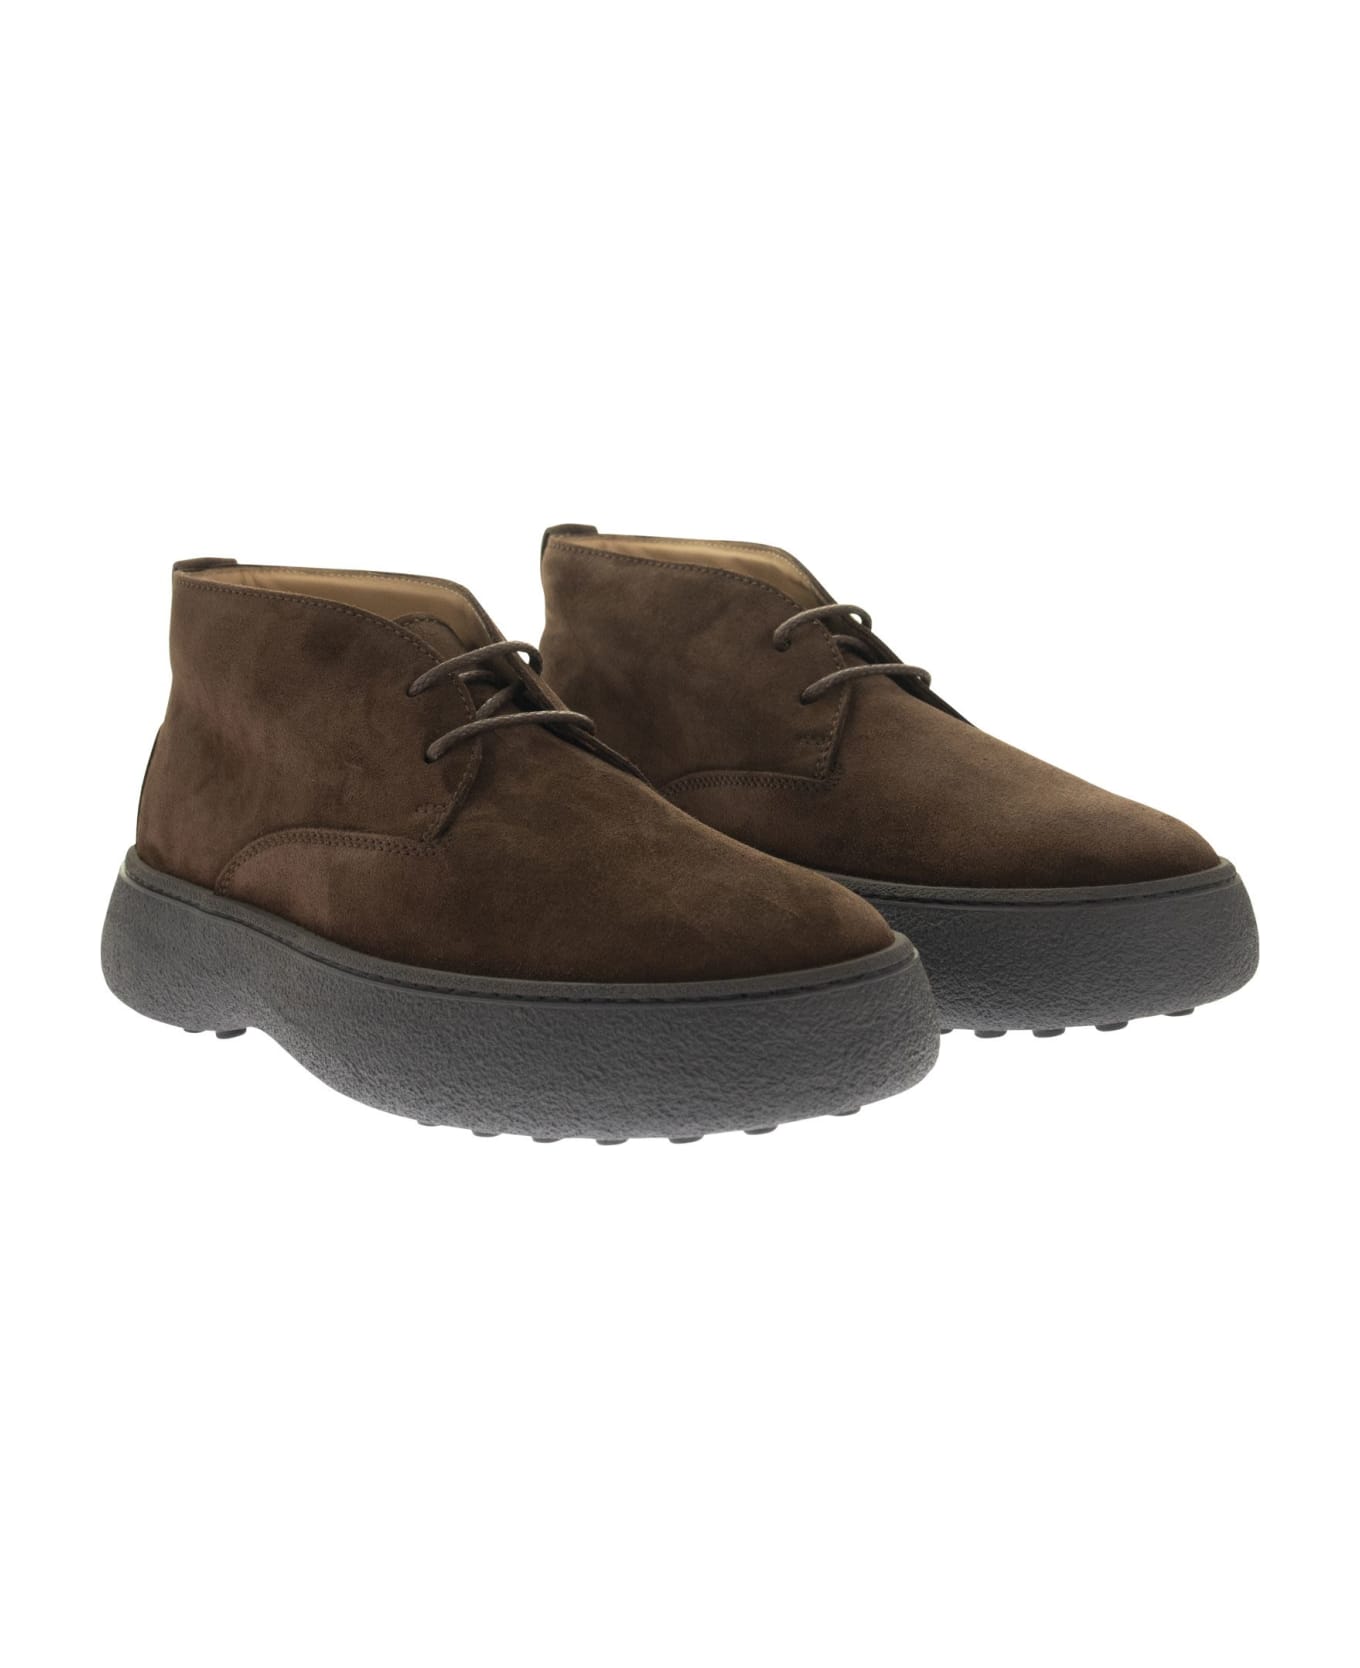 Tod's Suede Leather Ankle Boots - Brown